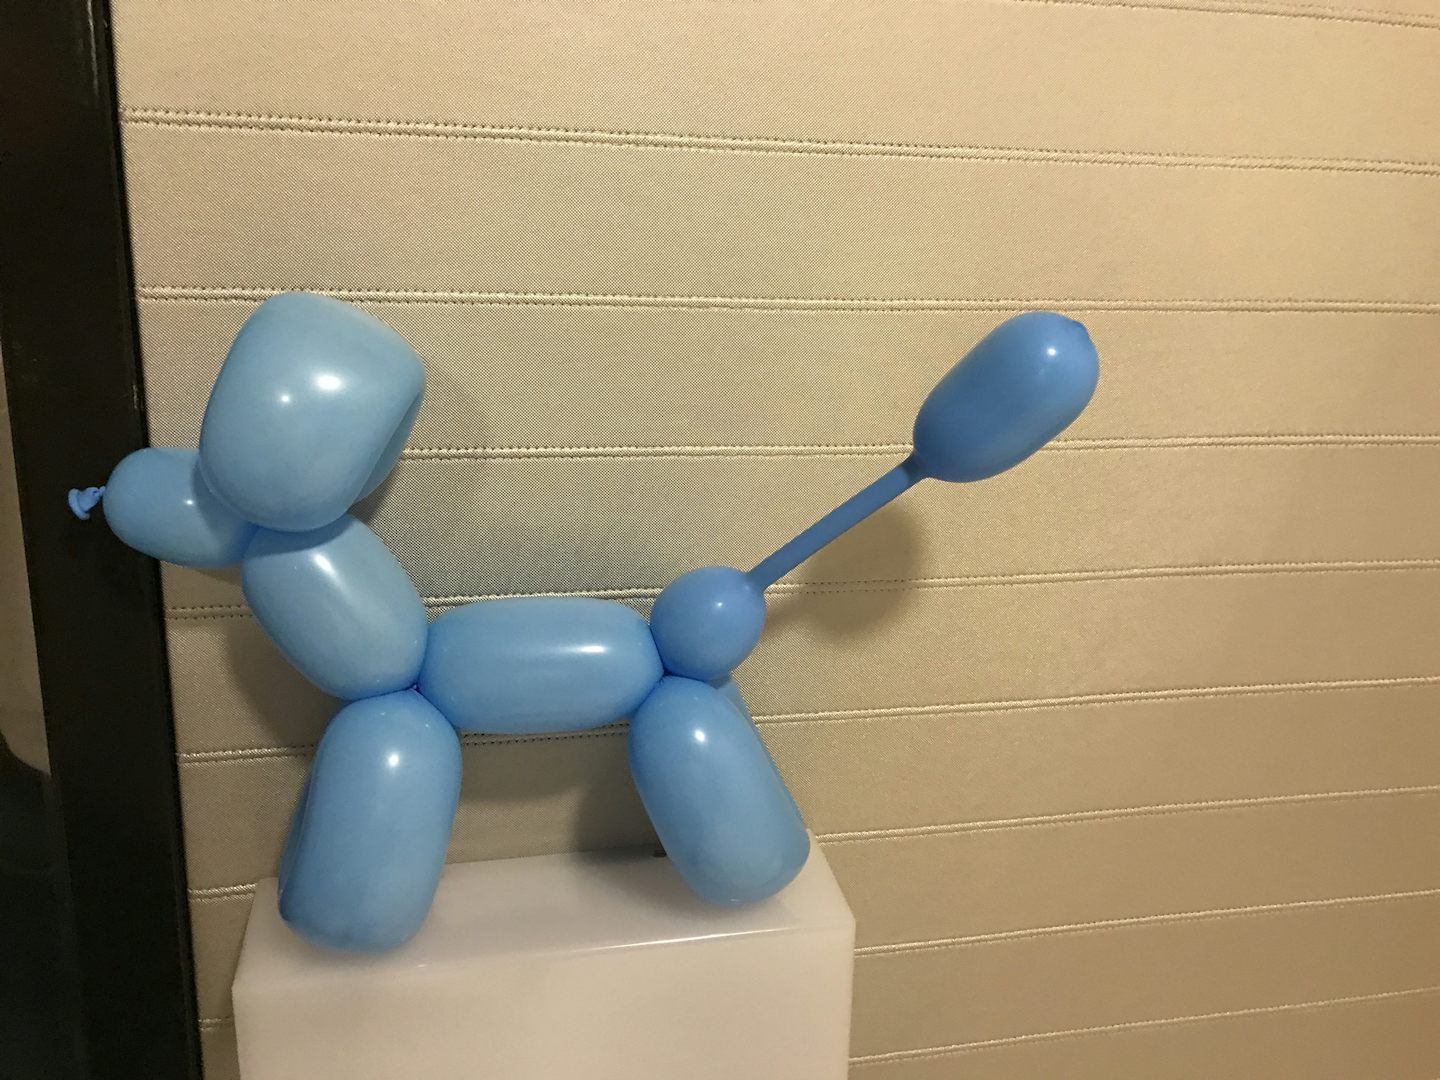 Made a dog out of a balloon.